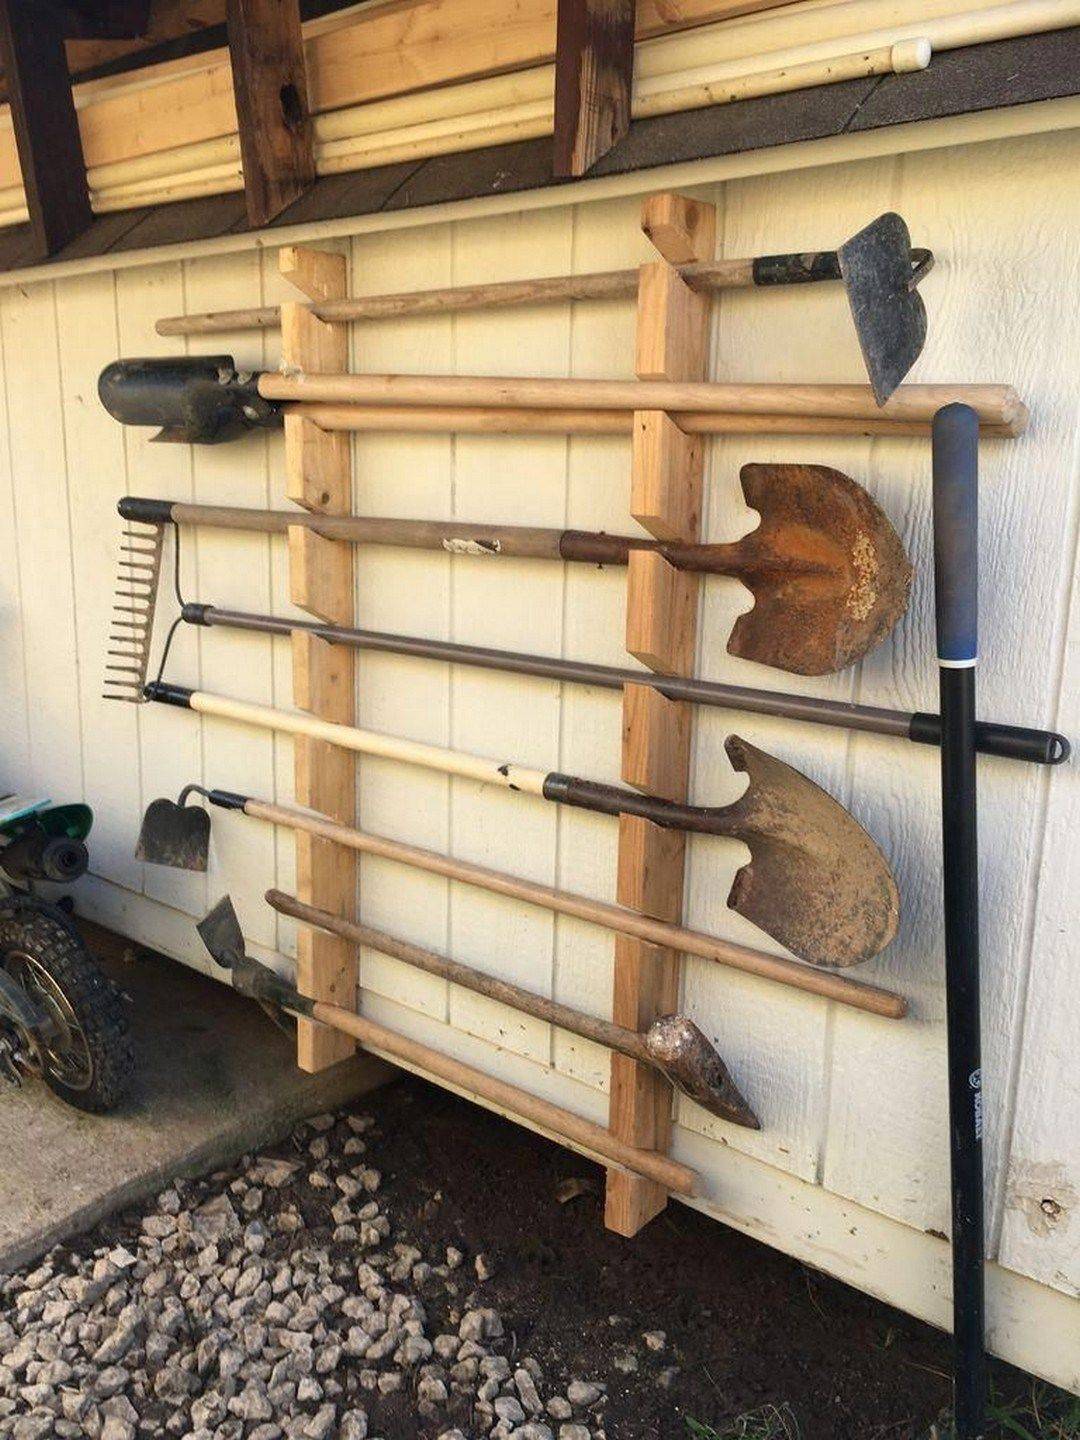 Your Shed Garden Tool Organization